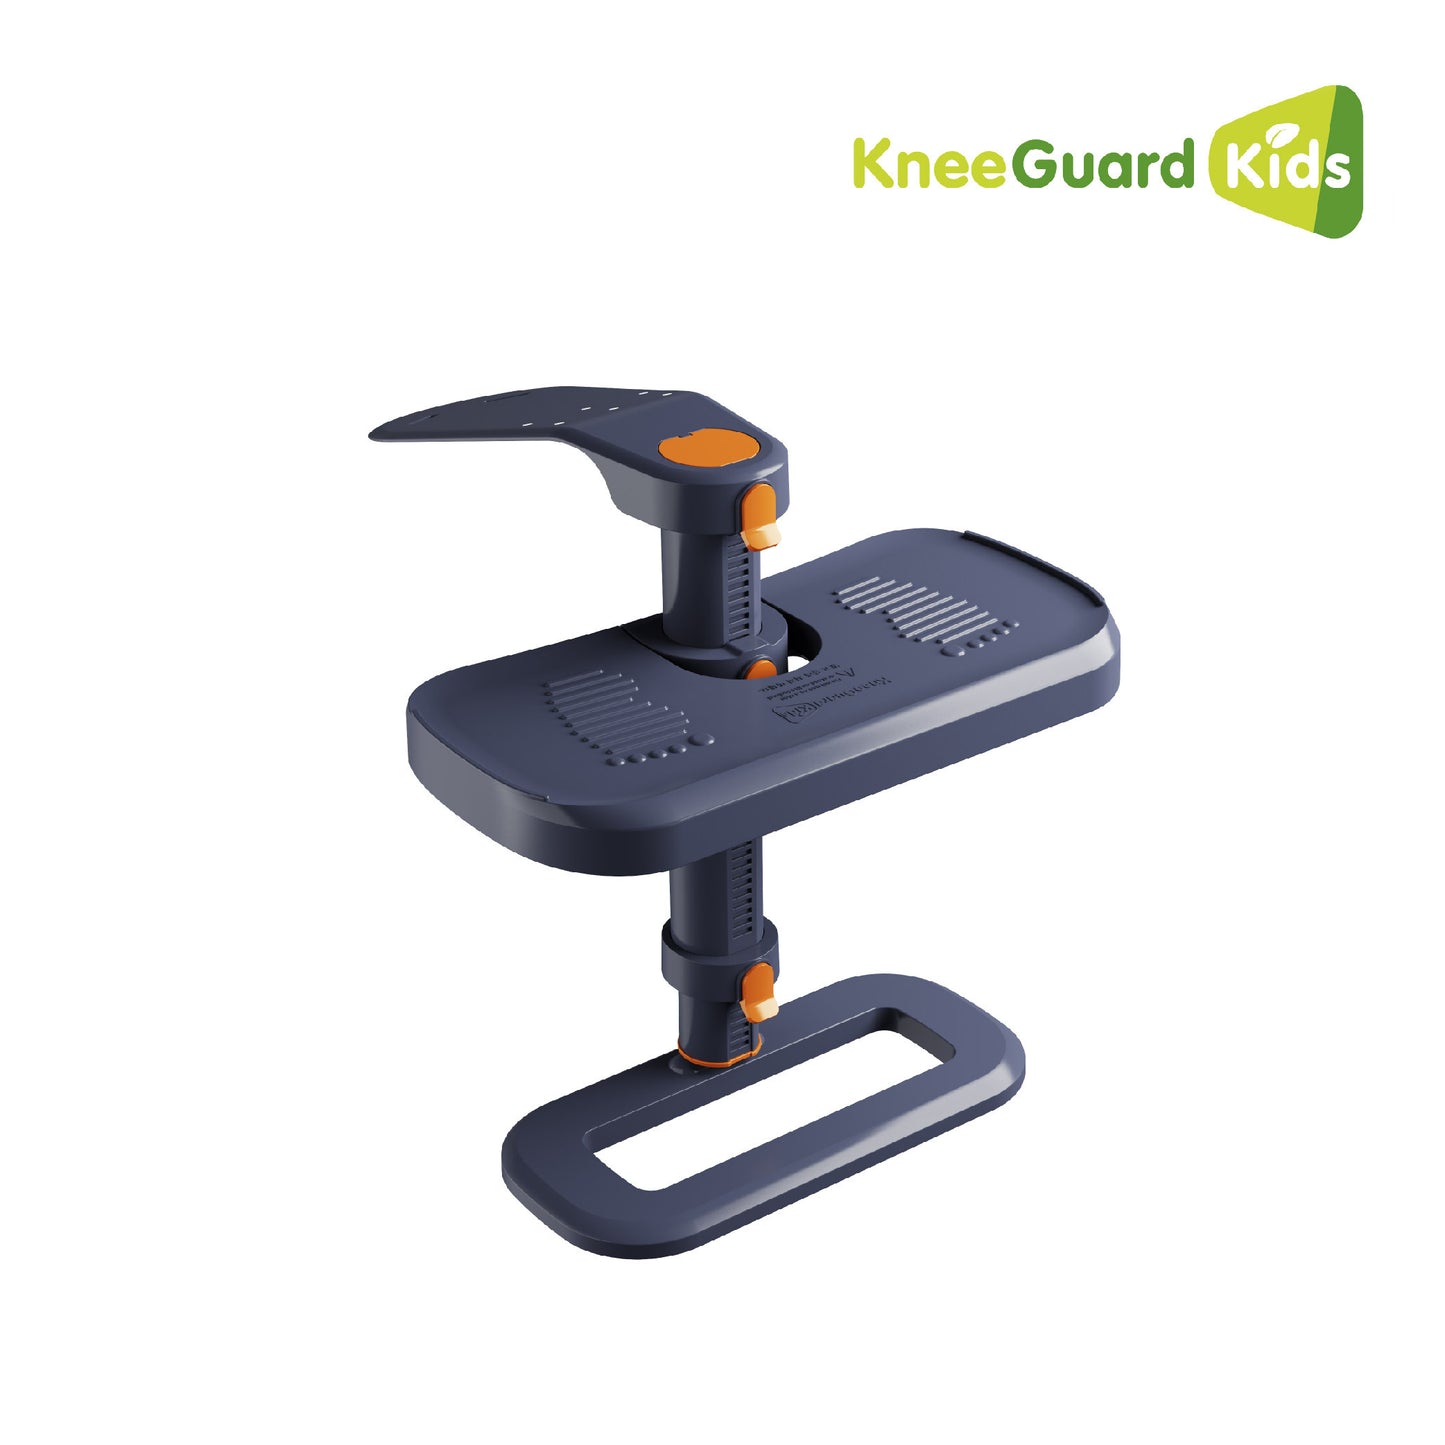 【KneeGuard Kids】Child safety seat auxiliary pedal fourth generation